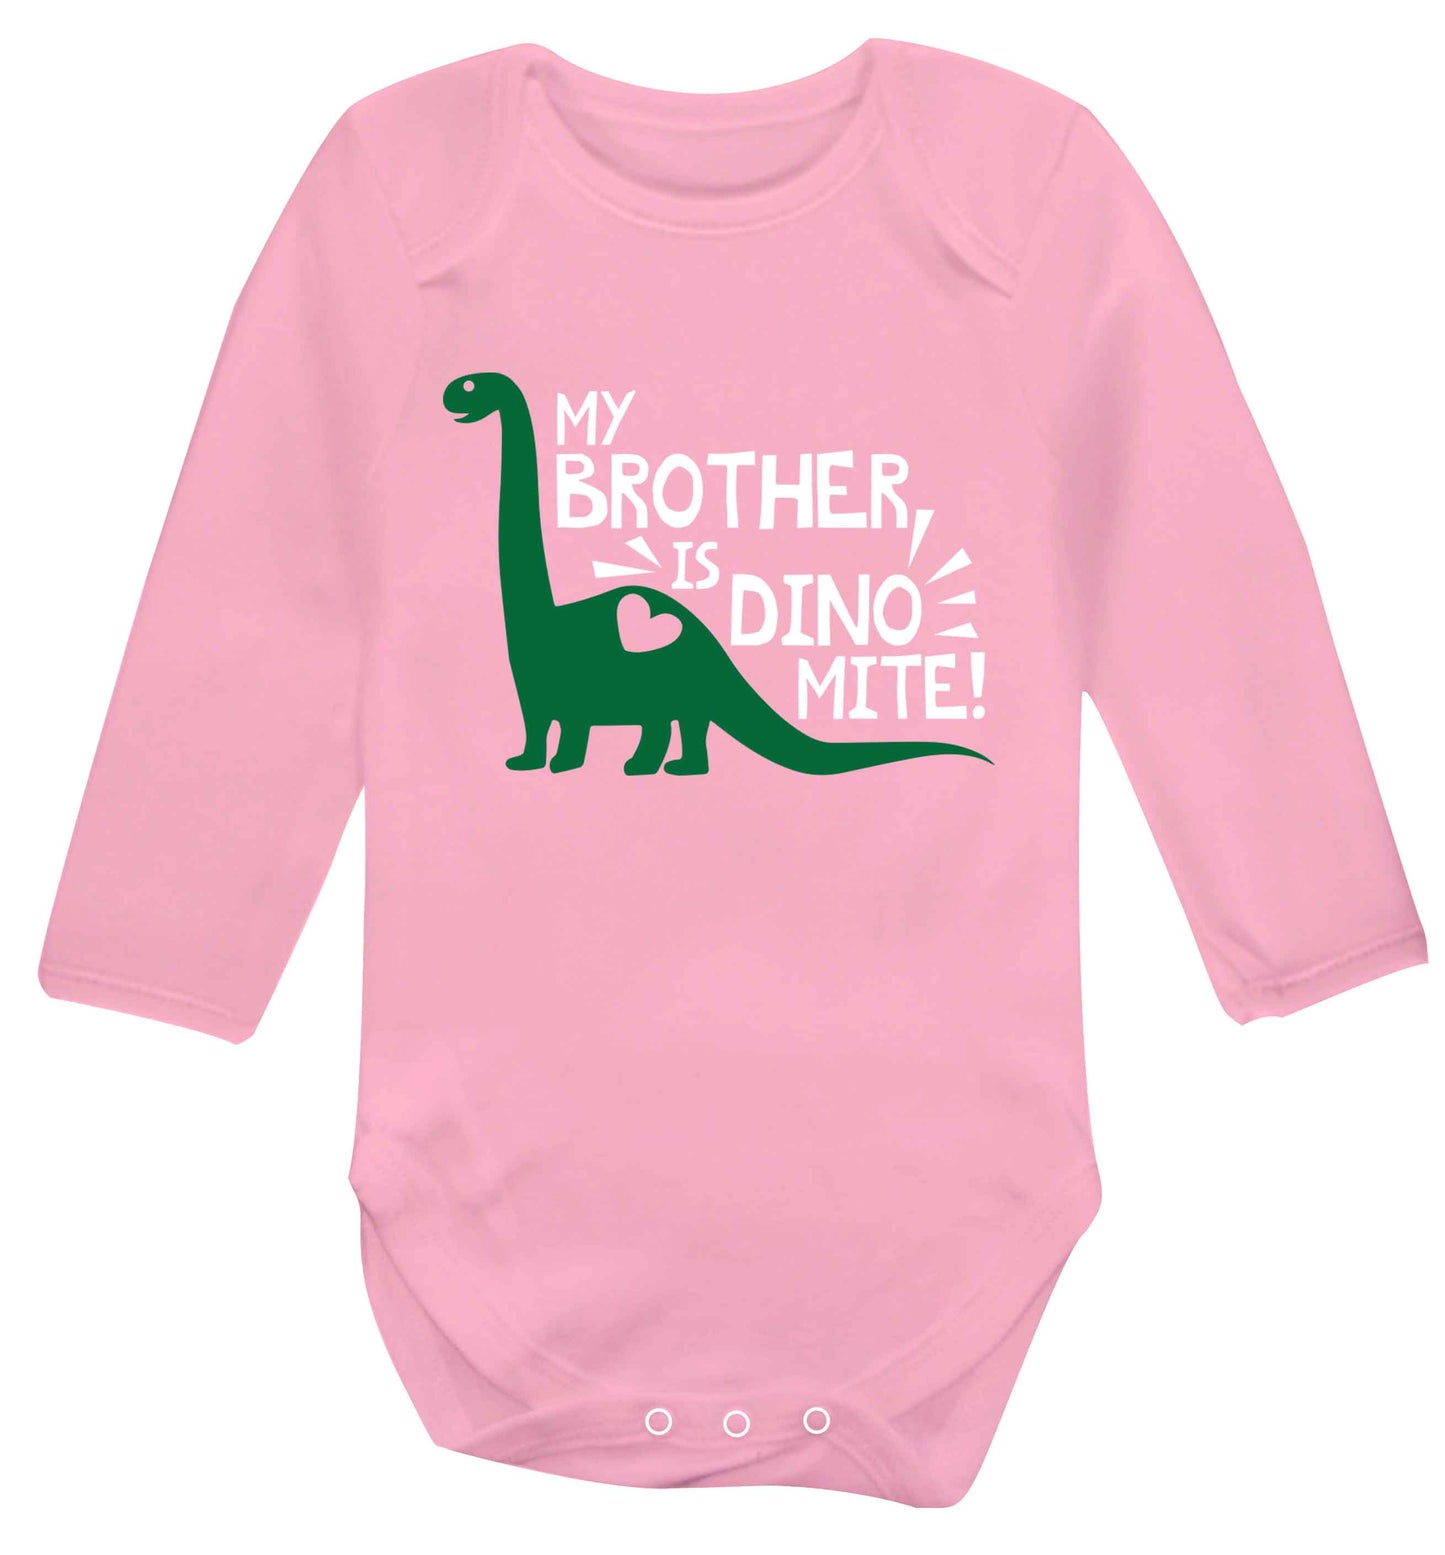 My brother is dinomite! Baby Vest long sleeved pale pink 6-12 months